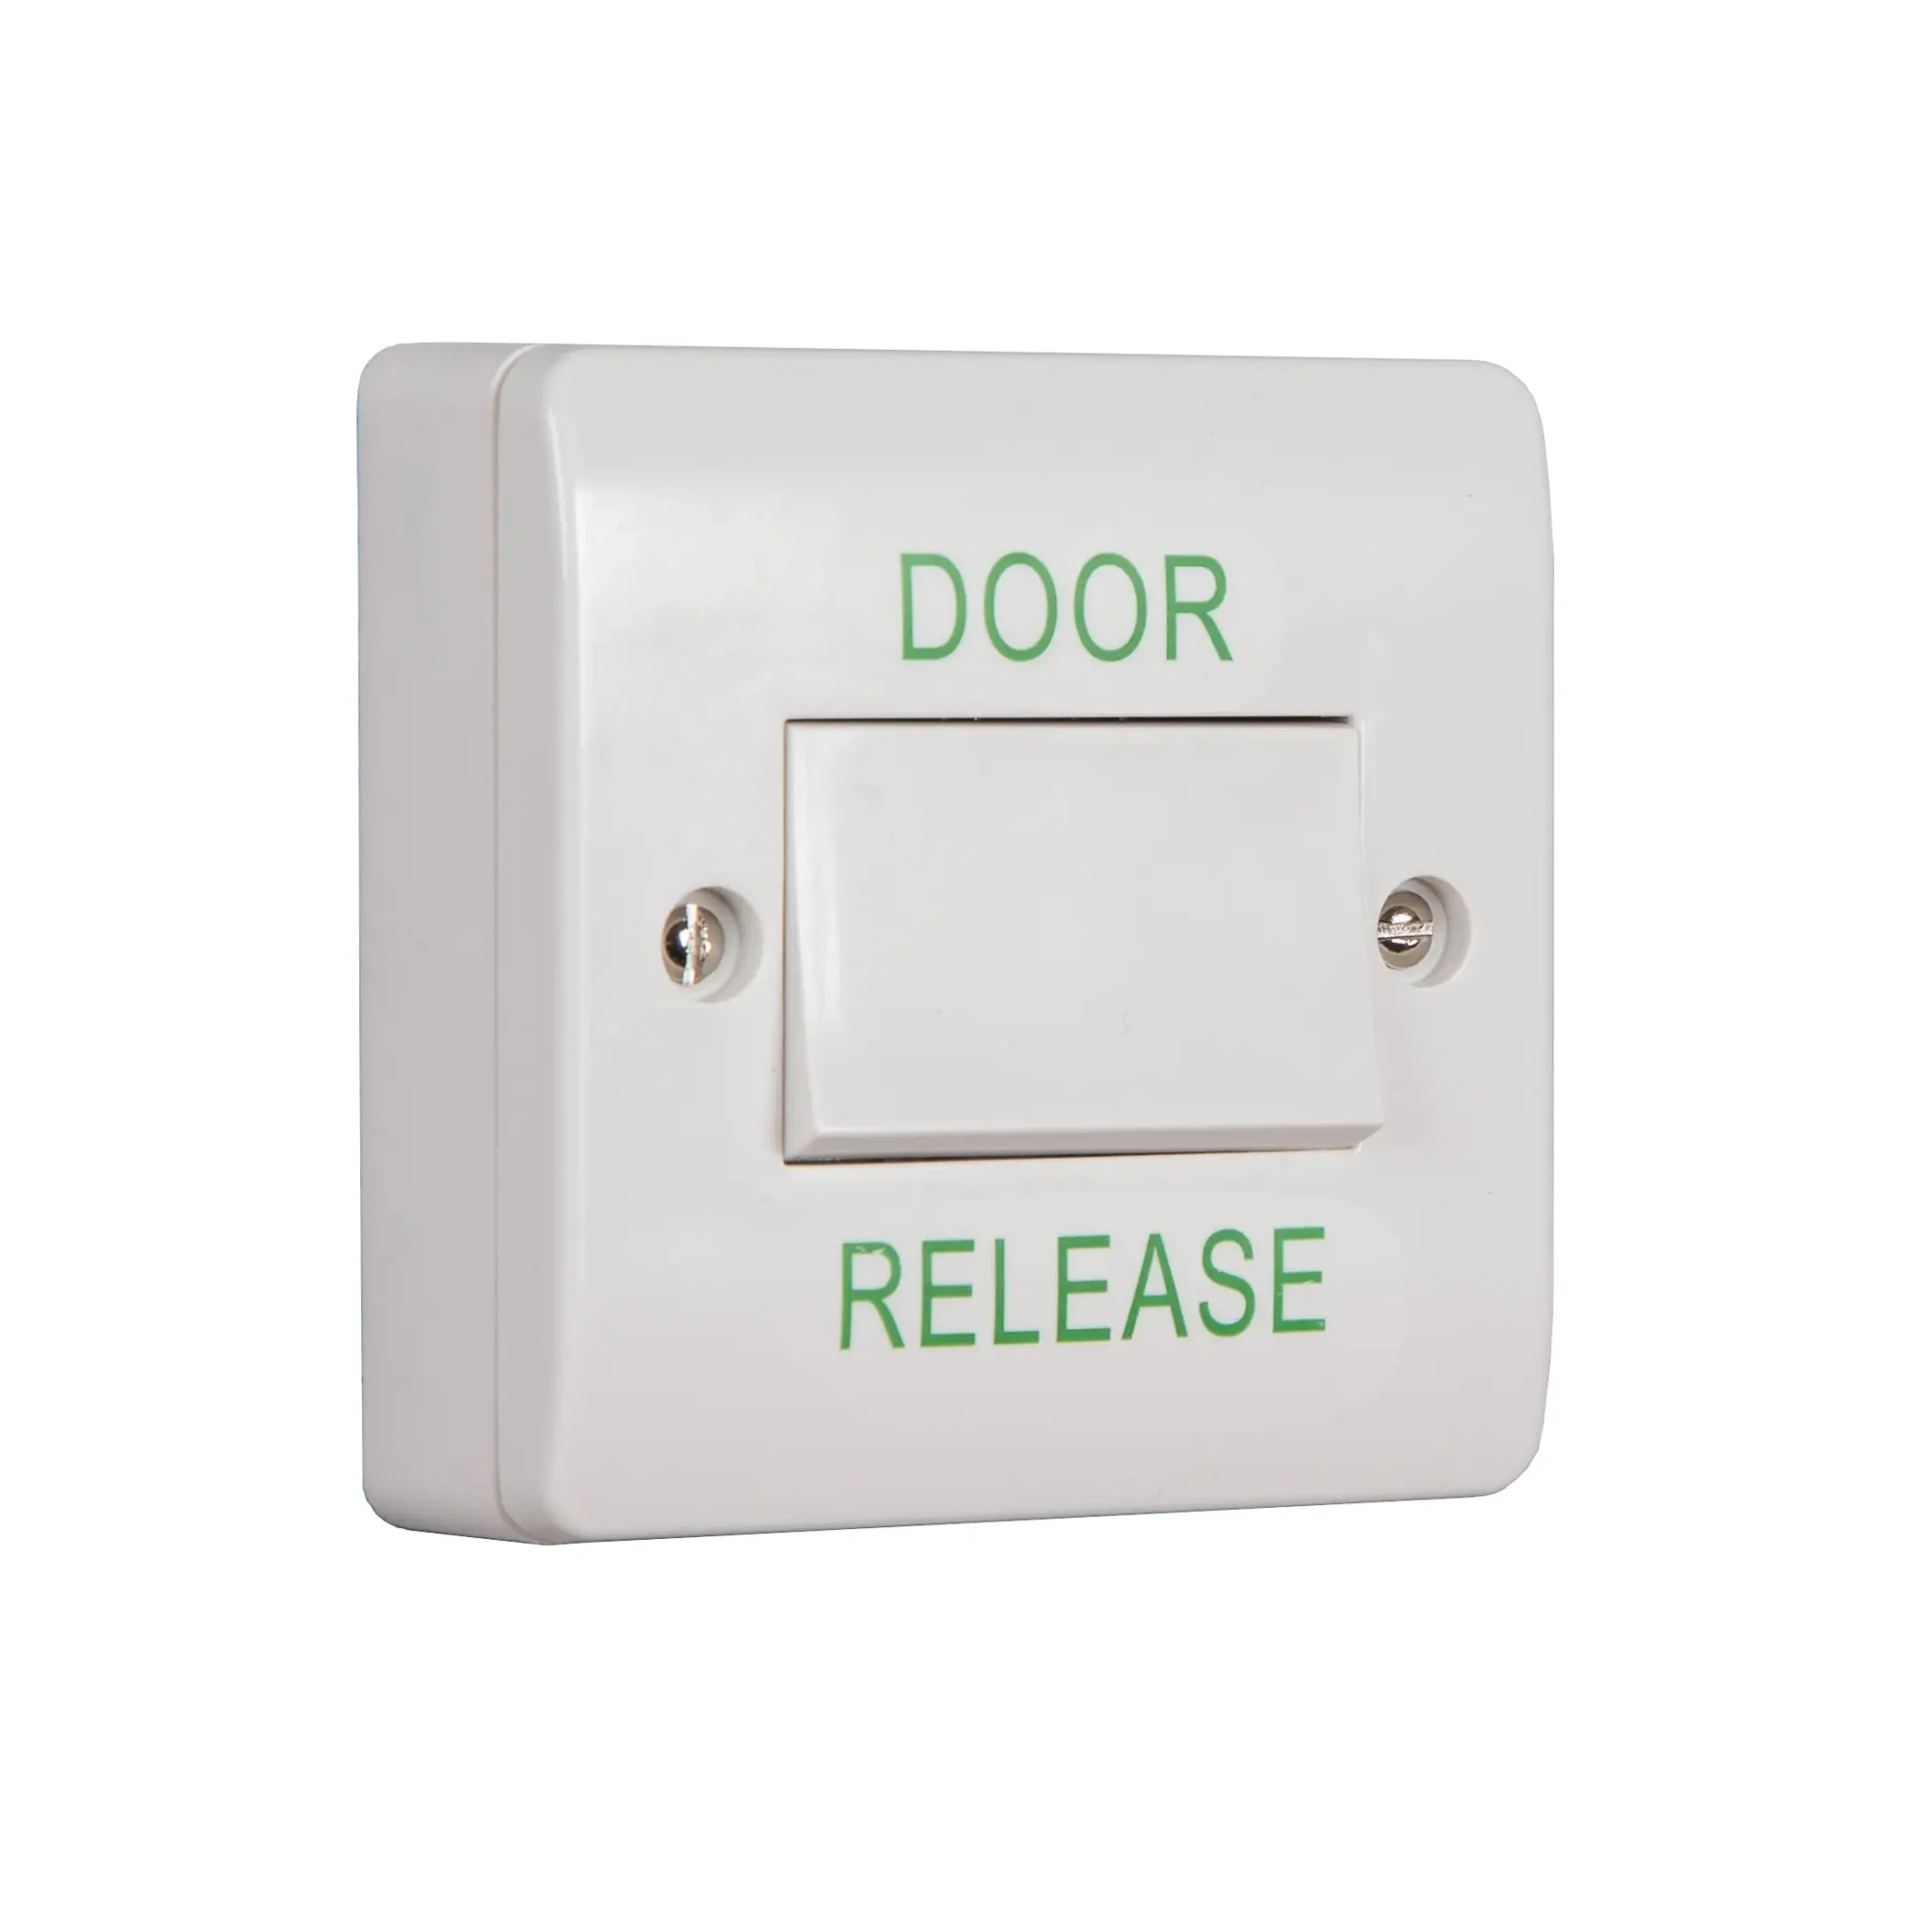 EBWLS-DR Exit Buttons With Large Push-Button - "Door Release" legend